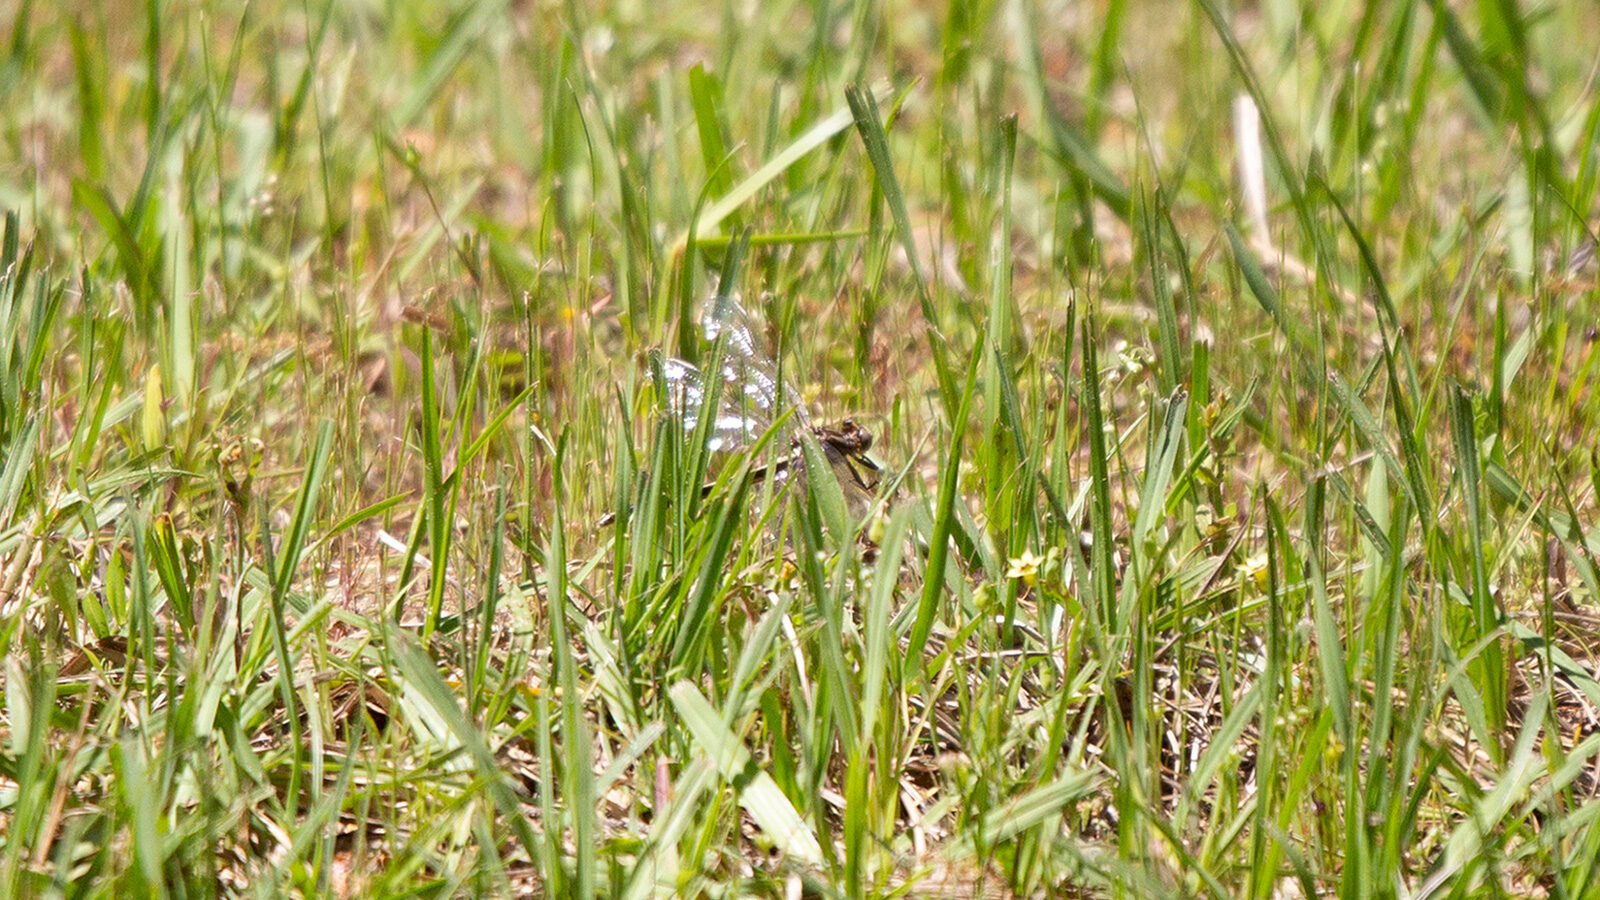 Female blue dasher dragonfly flying close to the ground